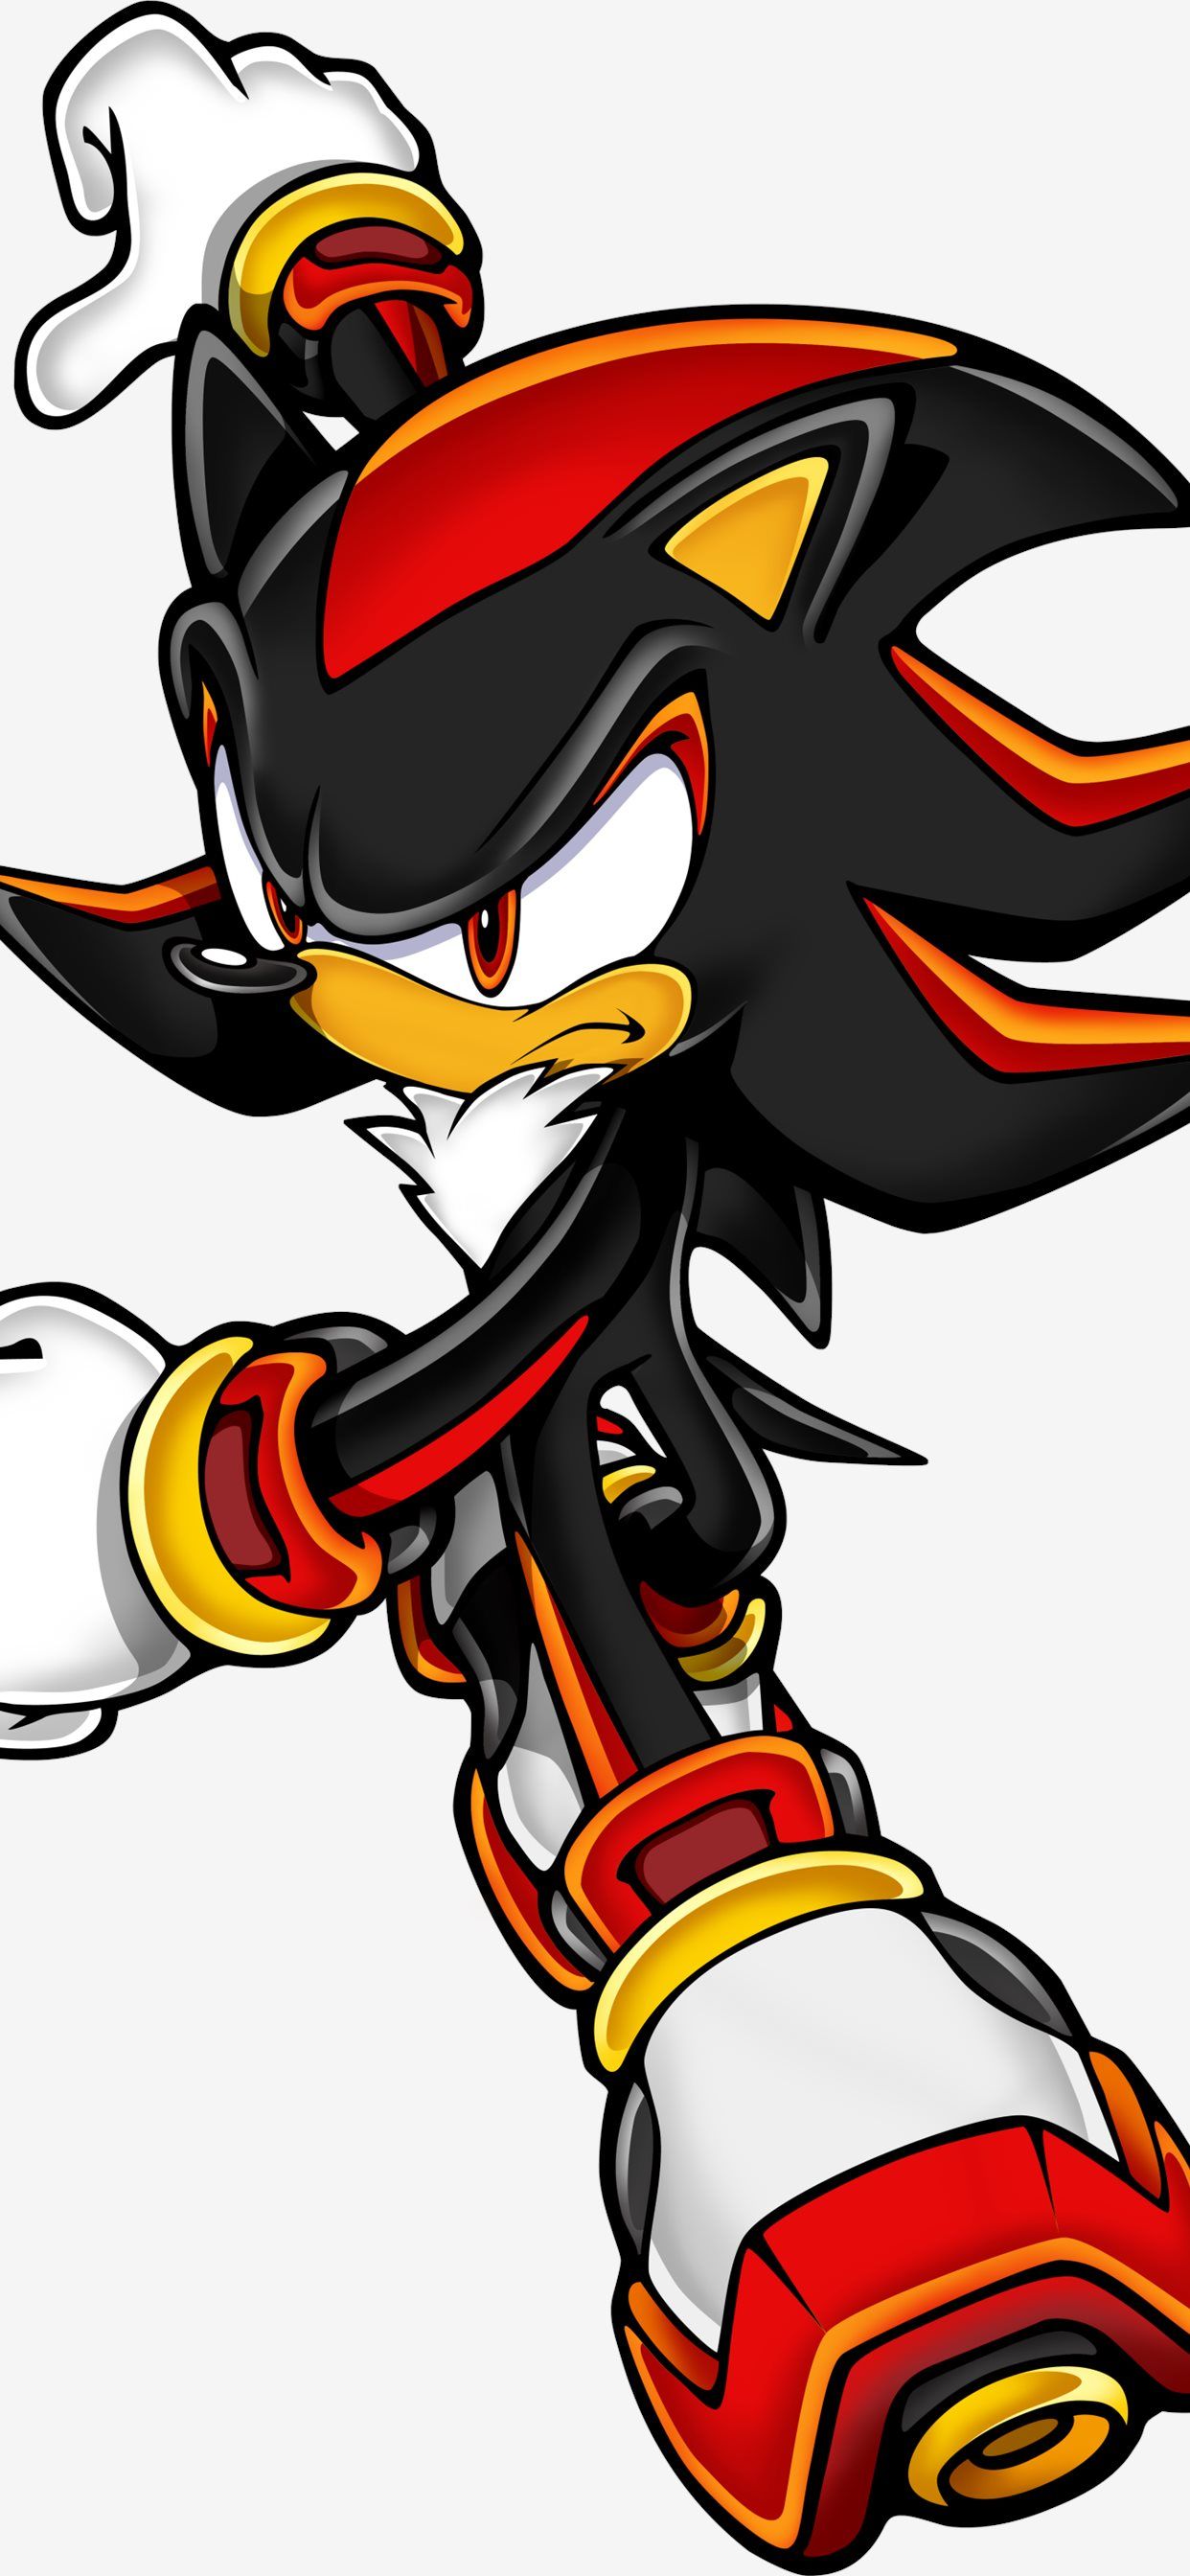 shadow the hedgehog 2 iPhone X Wallpaper Free Download